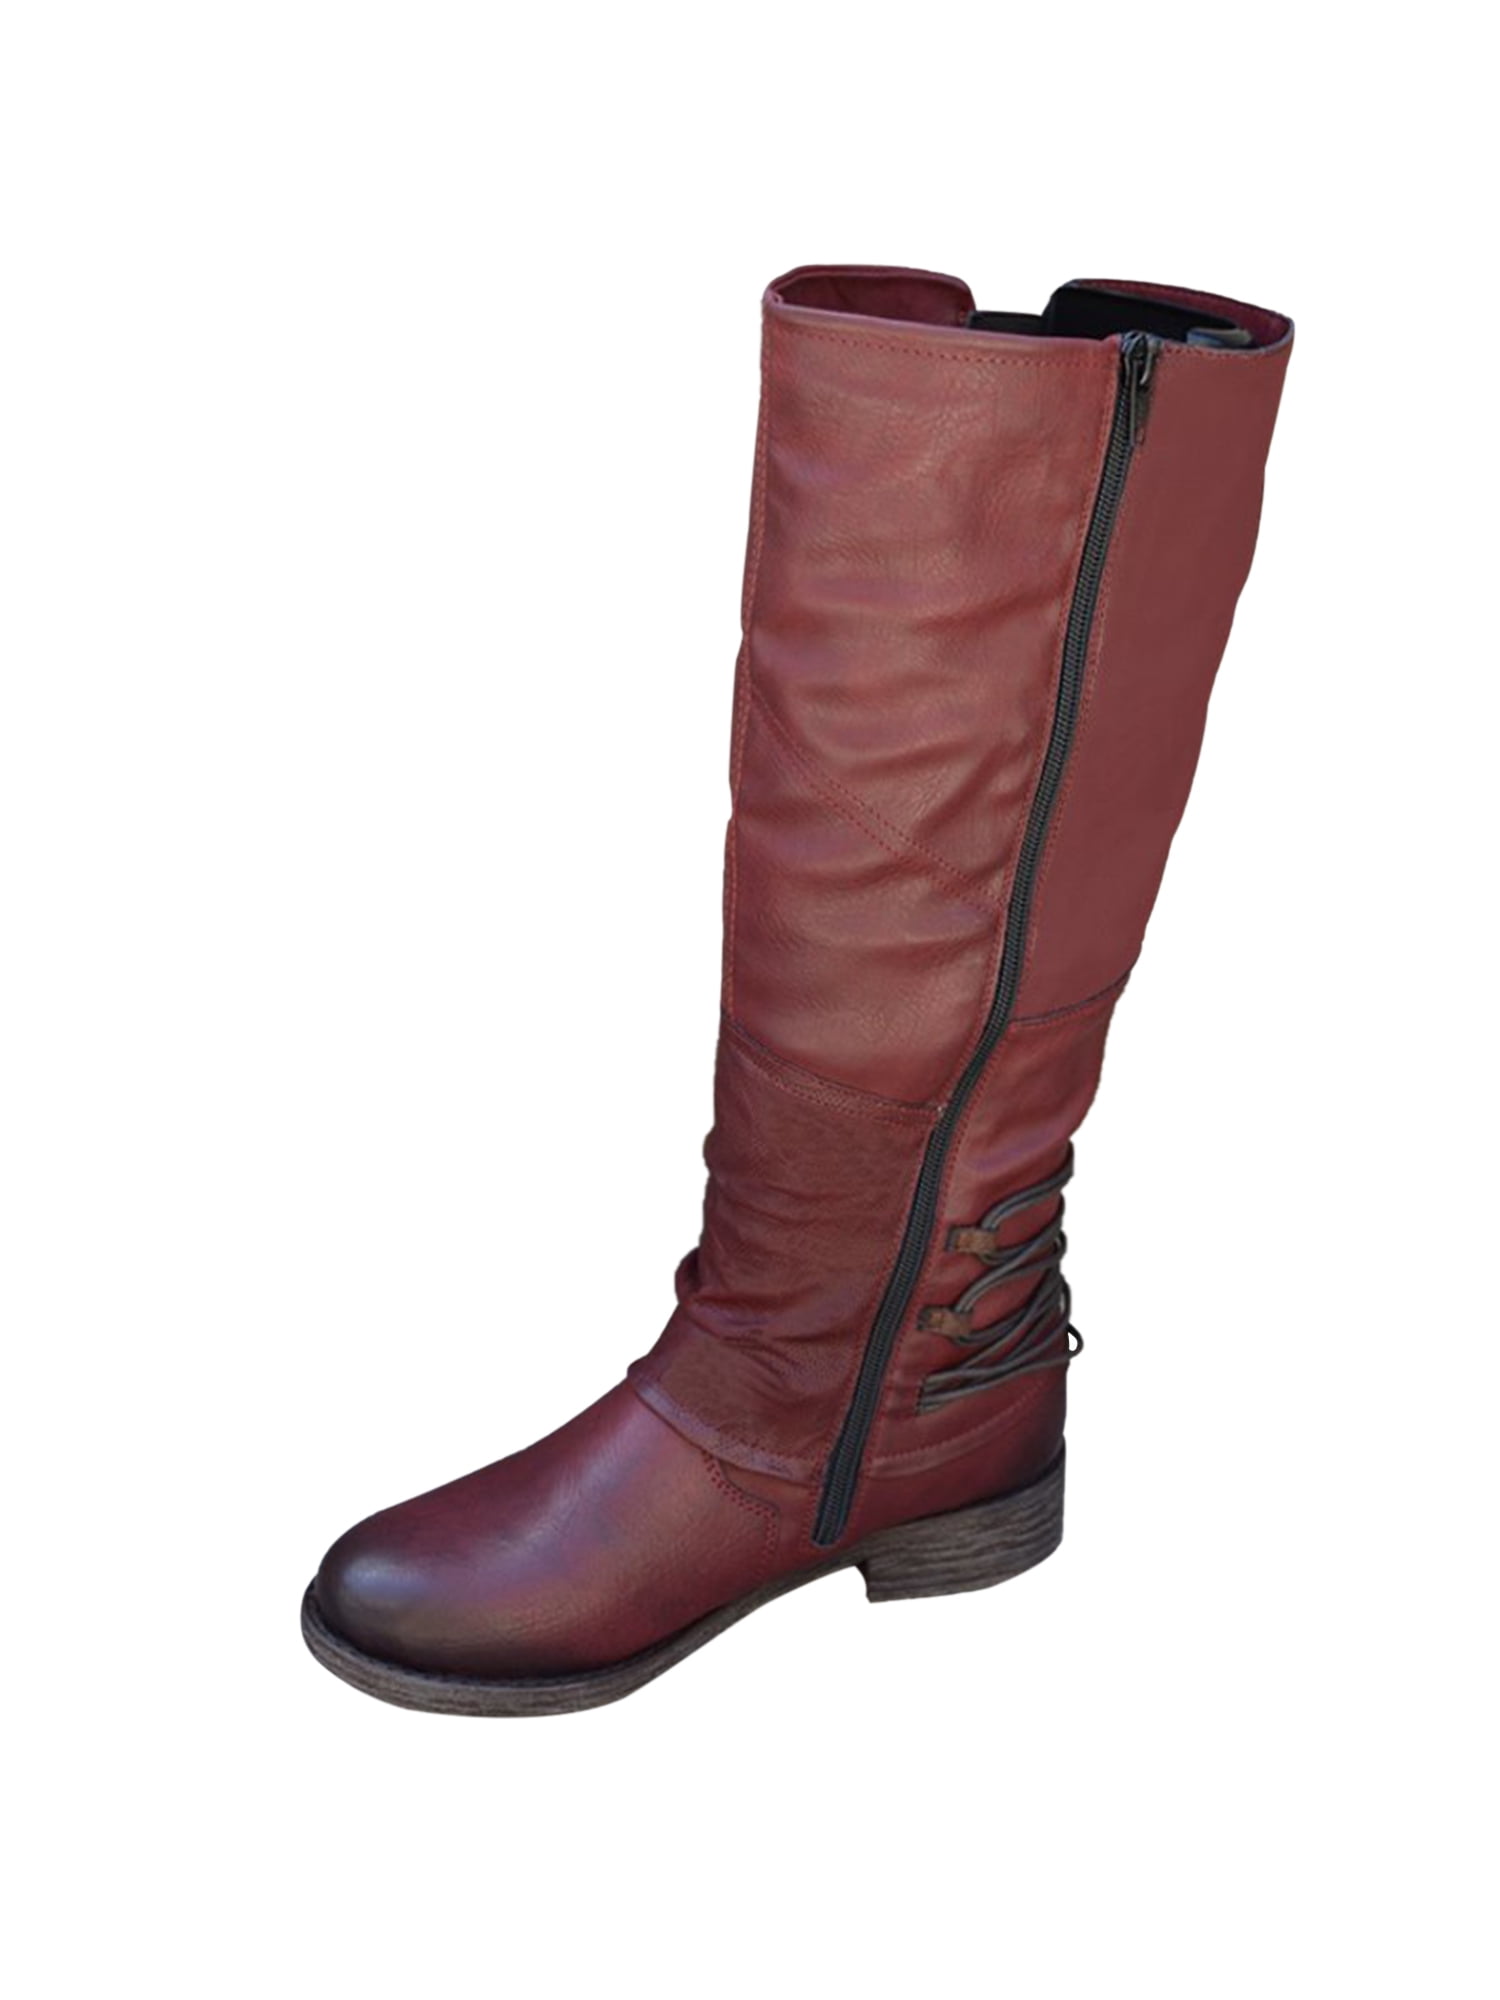 Womens Dressy Knee High Boots with Zipper Simple Round Toe Buckle Strap Platform Low Stacked Boots 